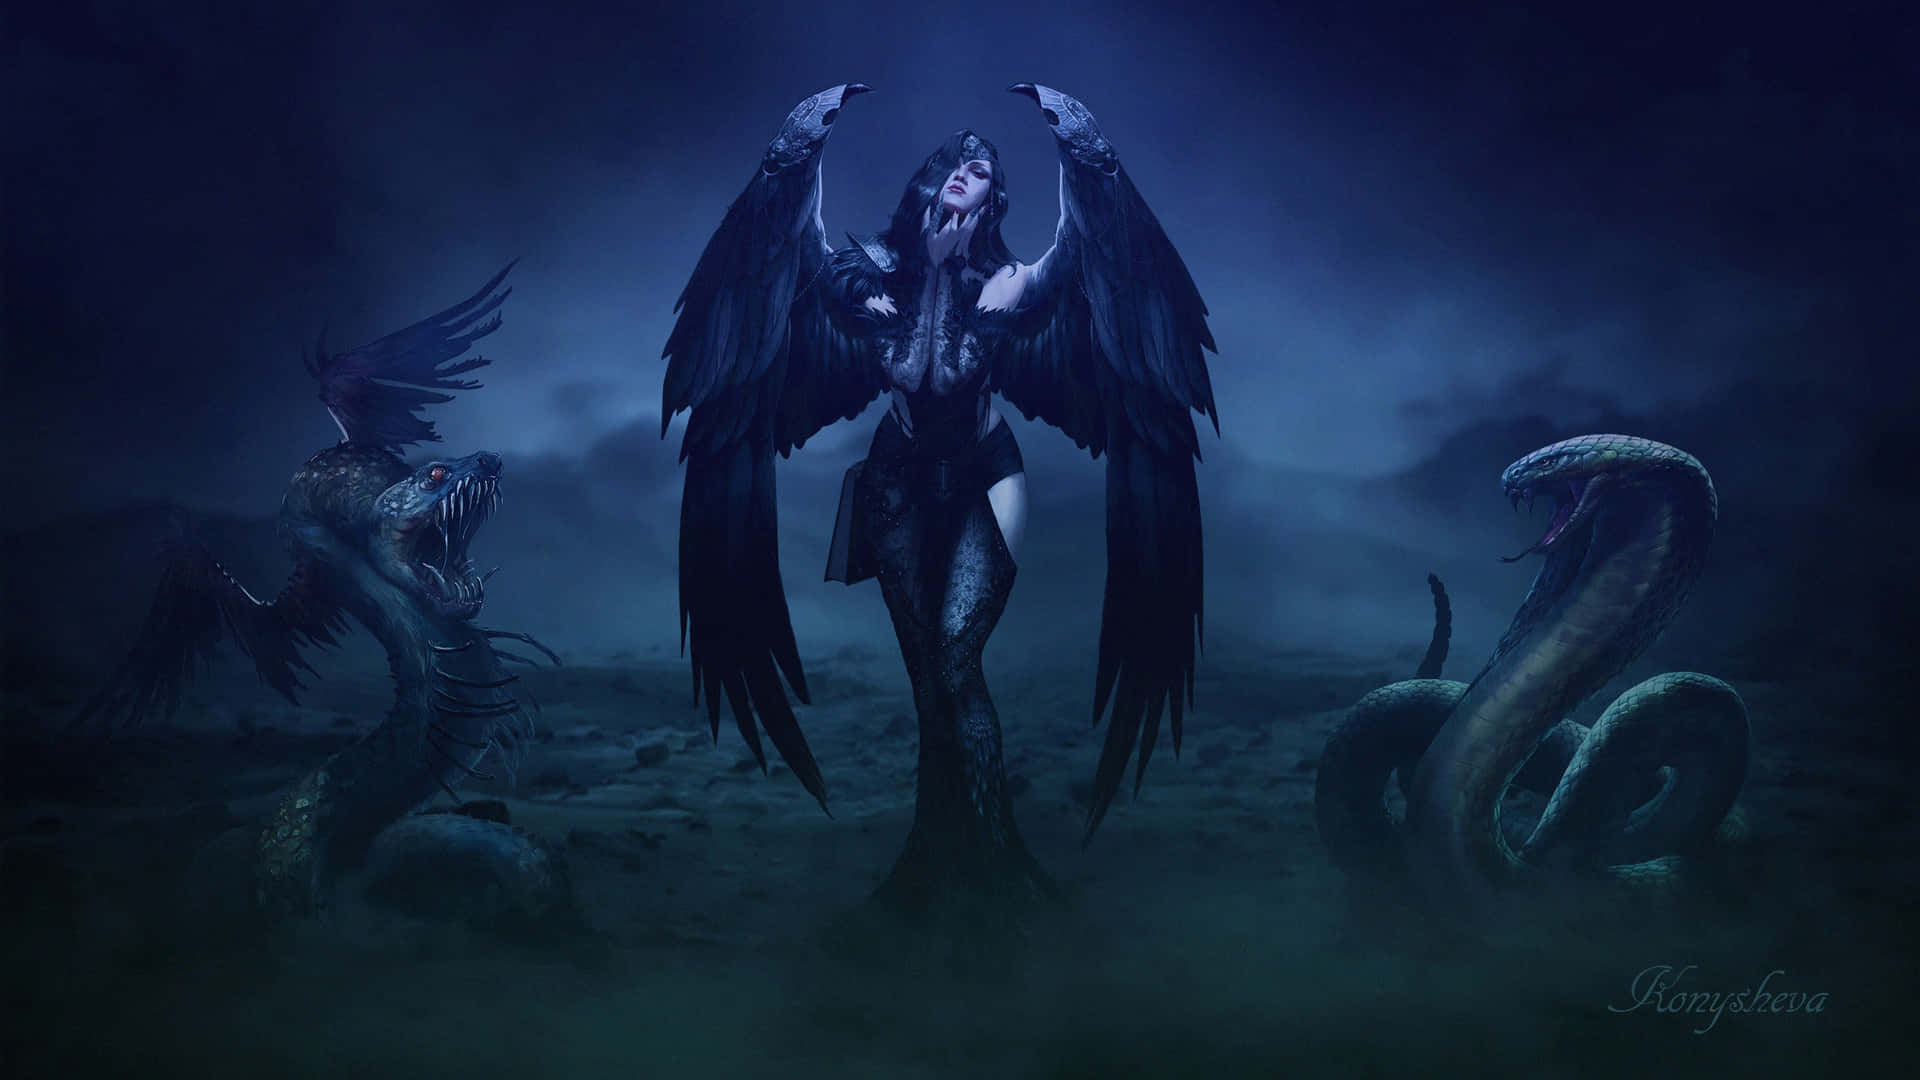 Explore the Dark and Mysterious Gothic World Wallpaper